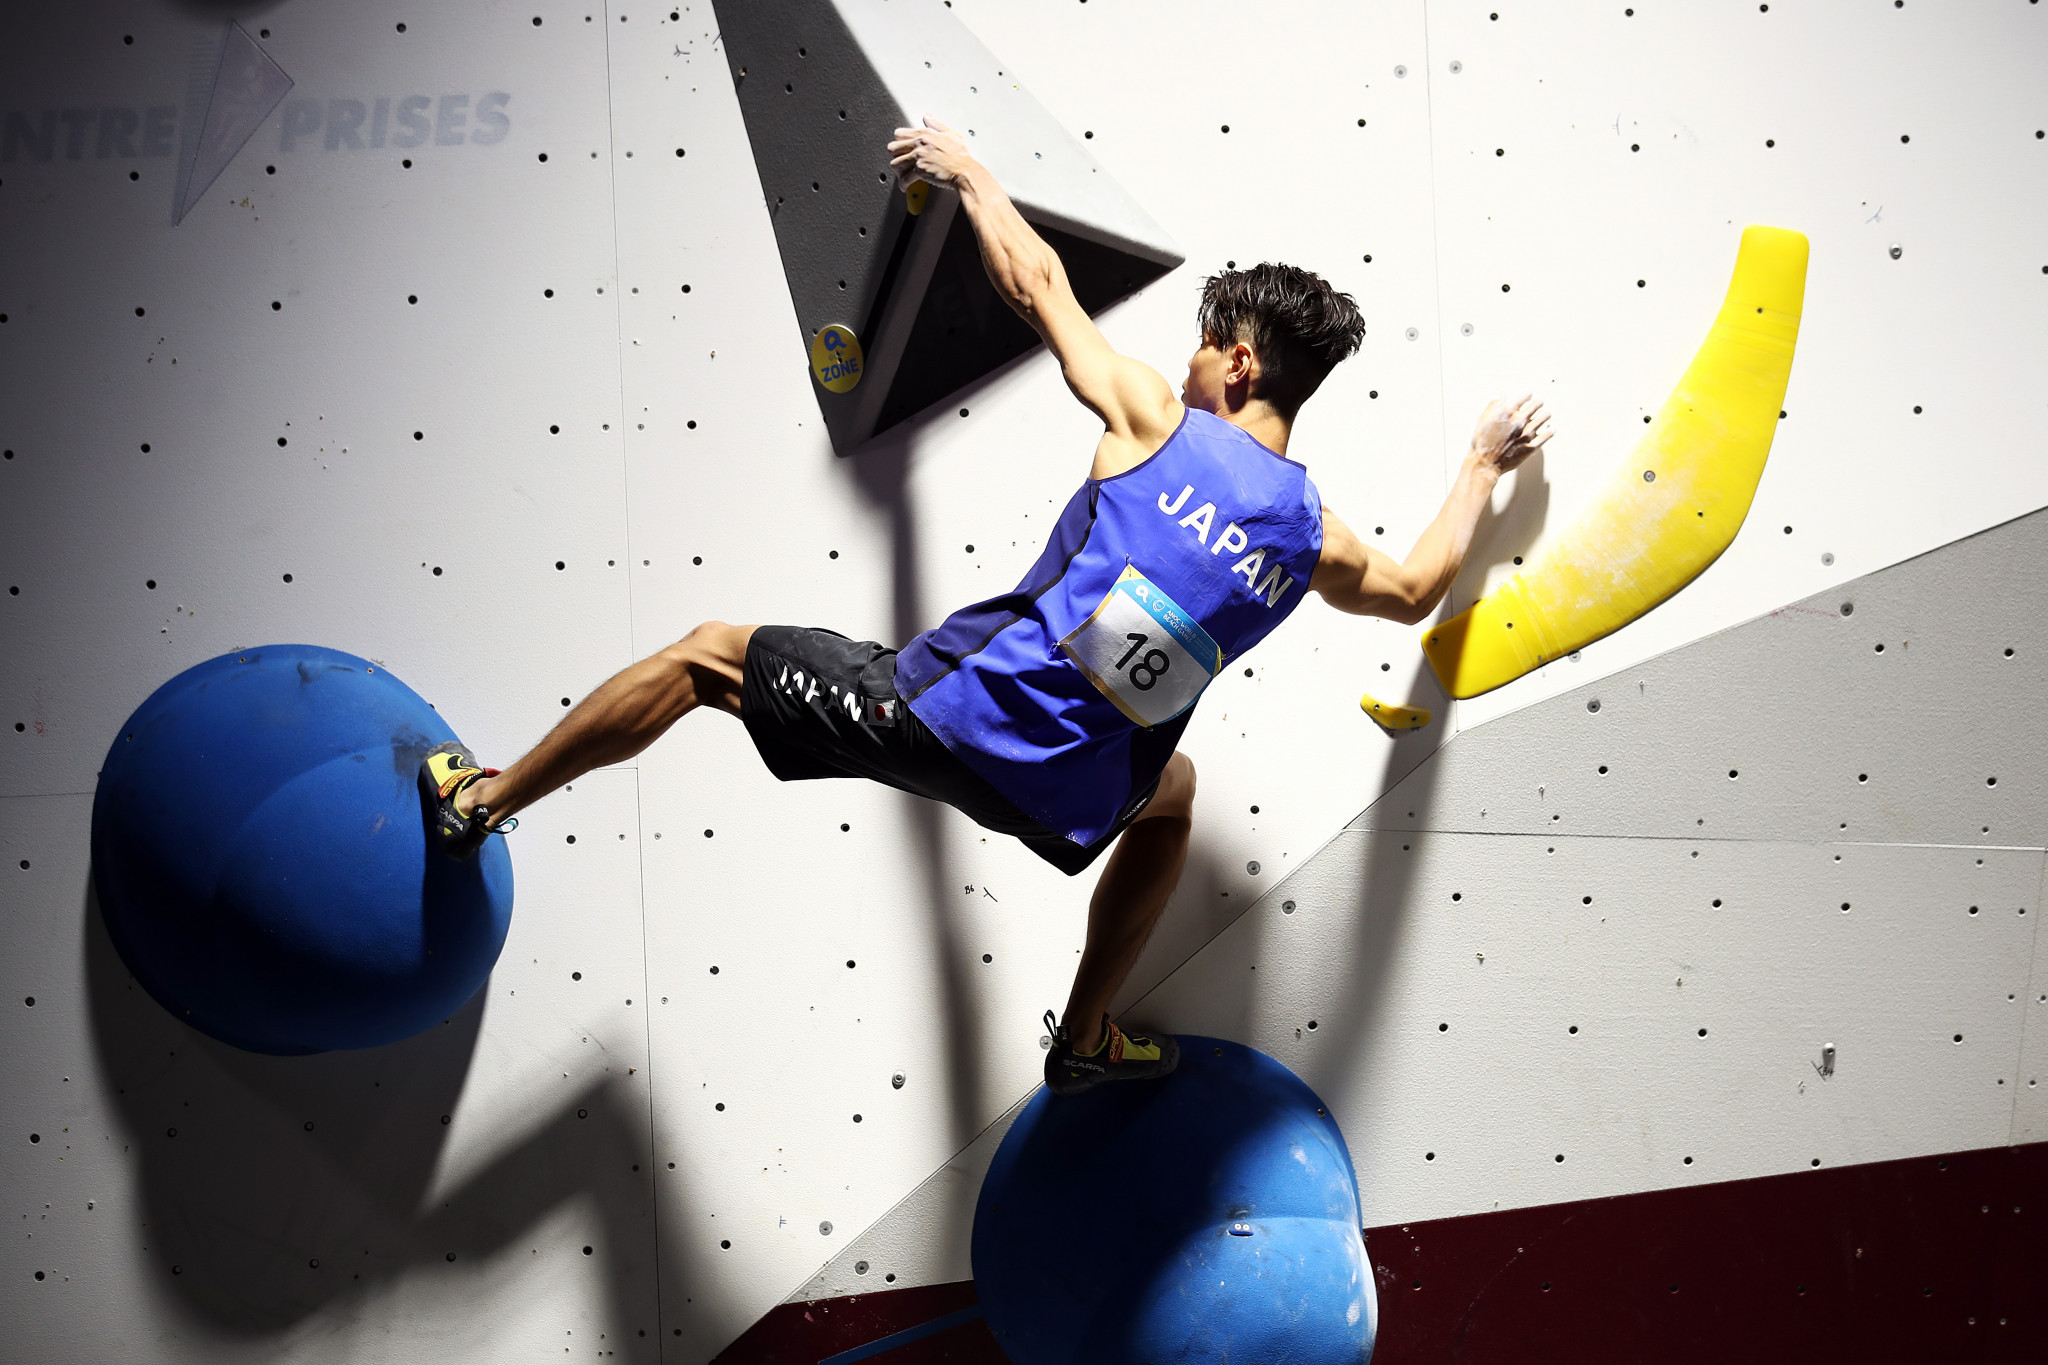 Kai Harada will be seeking a first IFSC World Cup Lead Climbing gold on home territory at Inzai starting tomorrow ©Getty Images